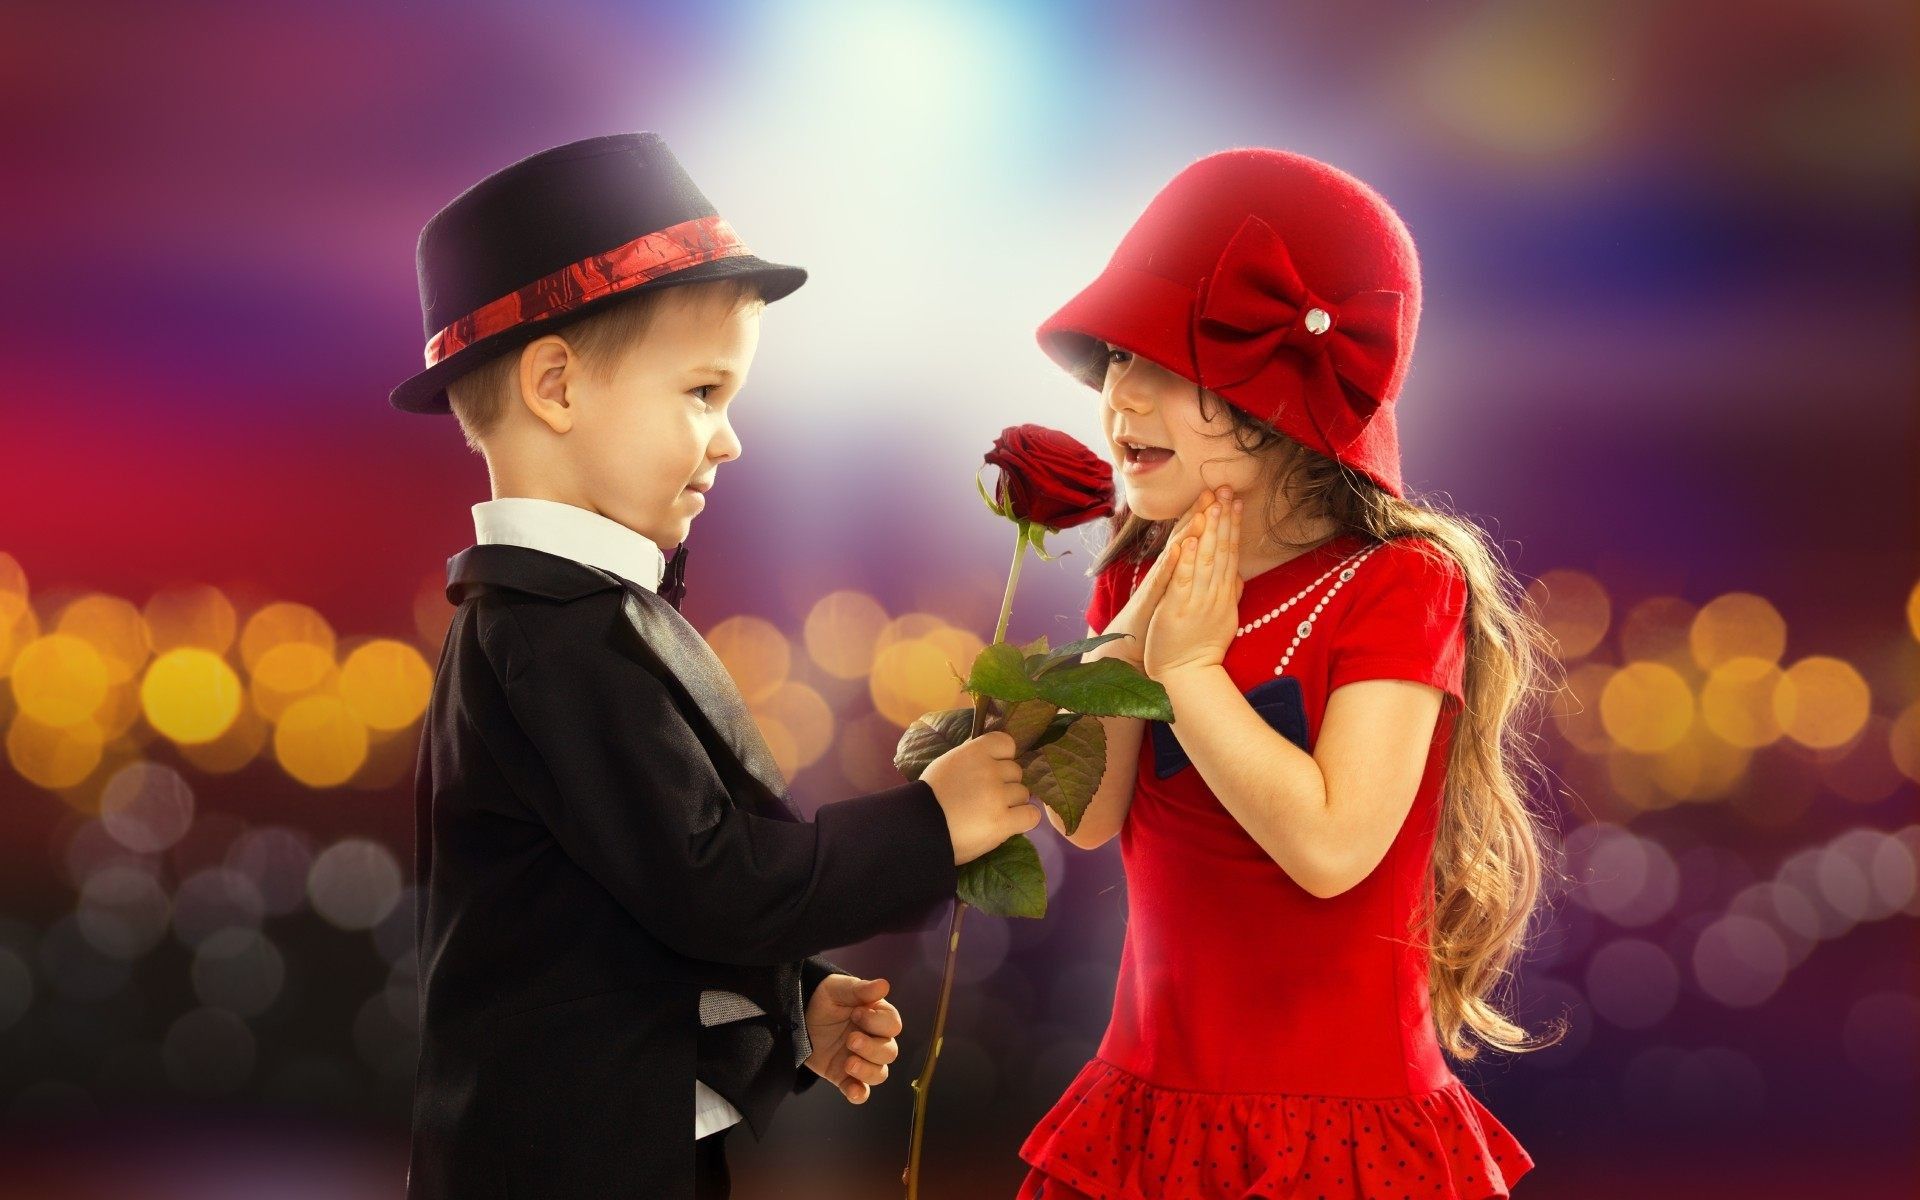 Love Romantic Boys And Girls Wallpaper And Picture Proposing A Girl With Red Rose